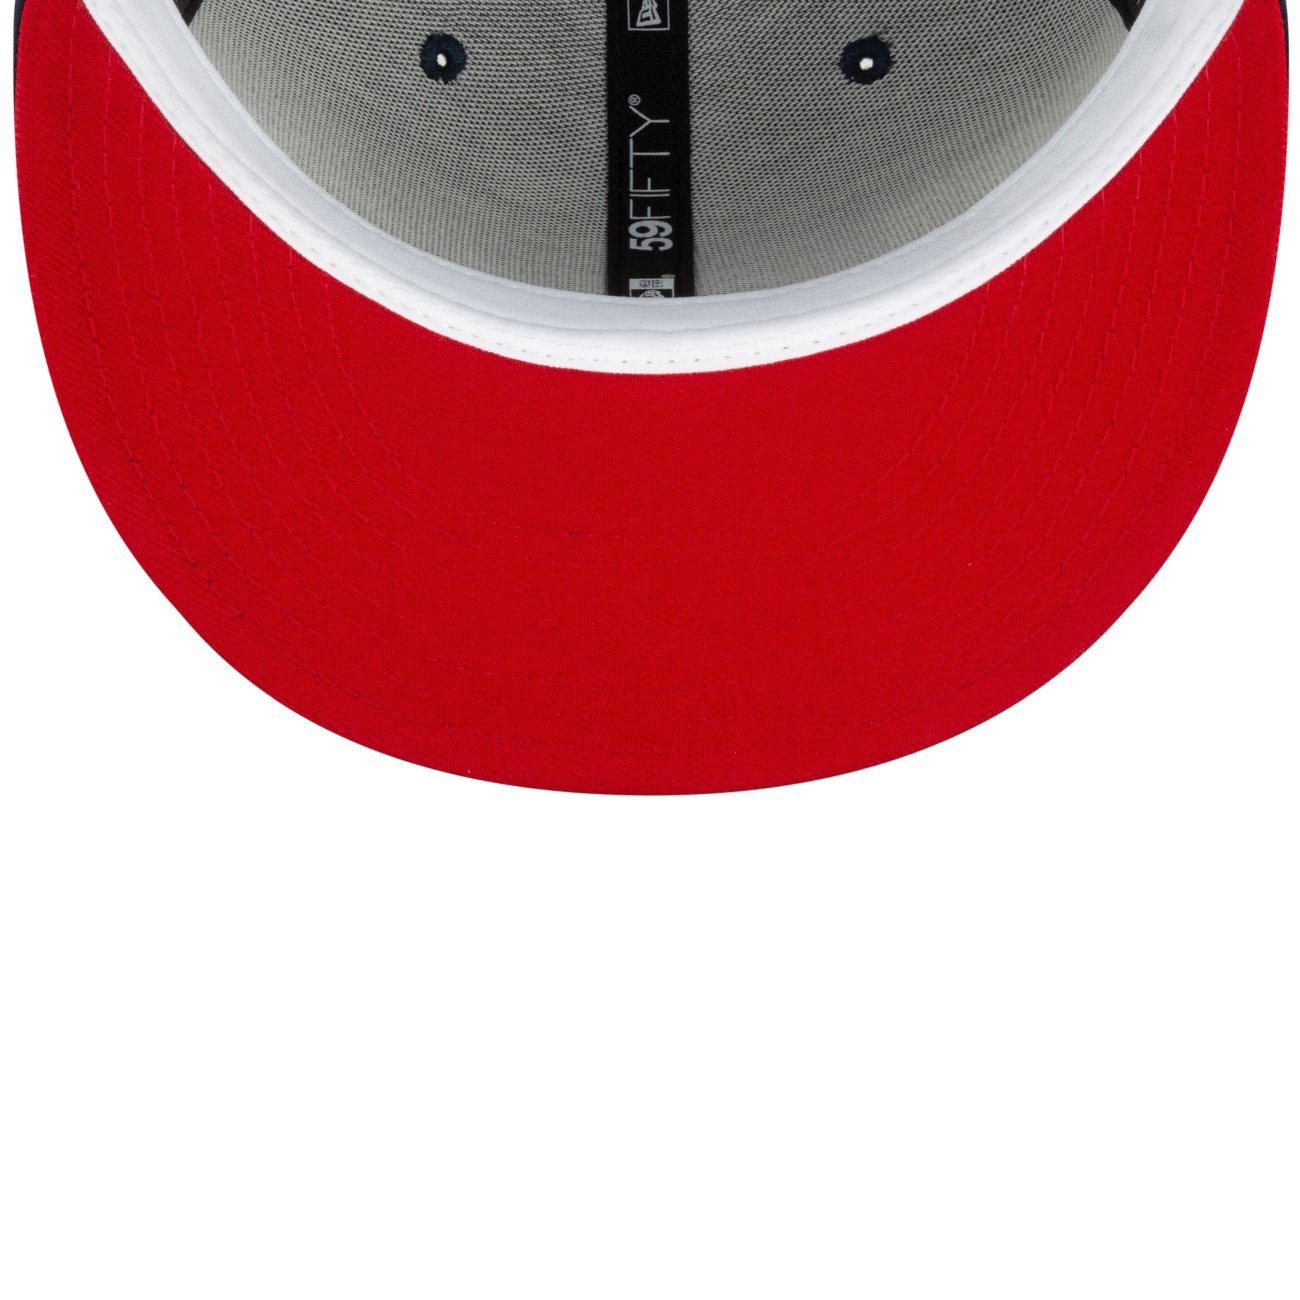 Era New WORLD SERIES Nationals Fitted Cap 59Fifty MLB Washington